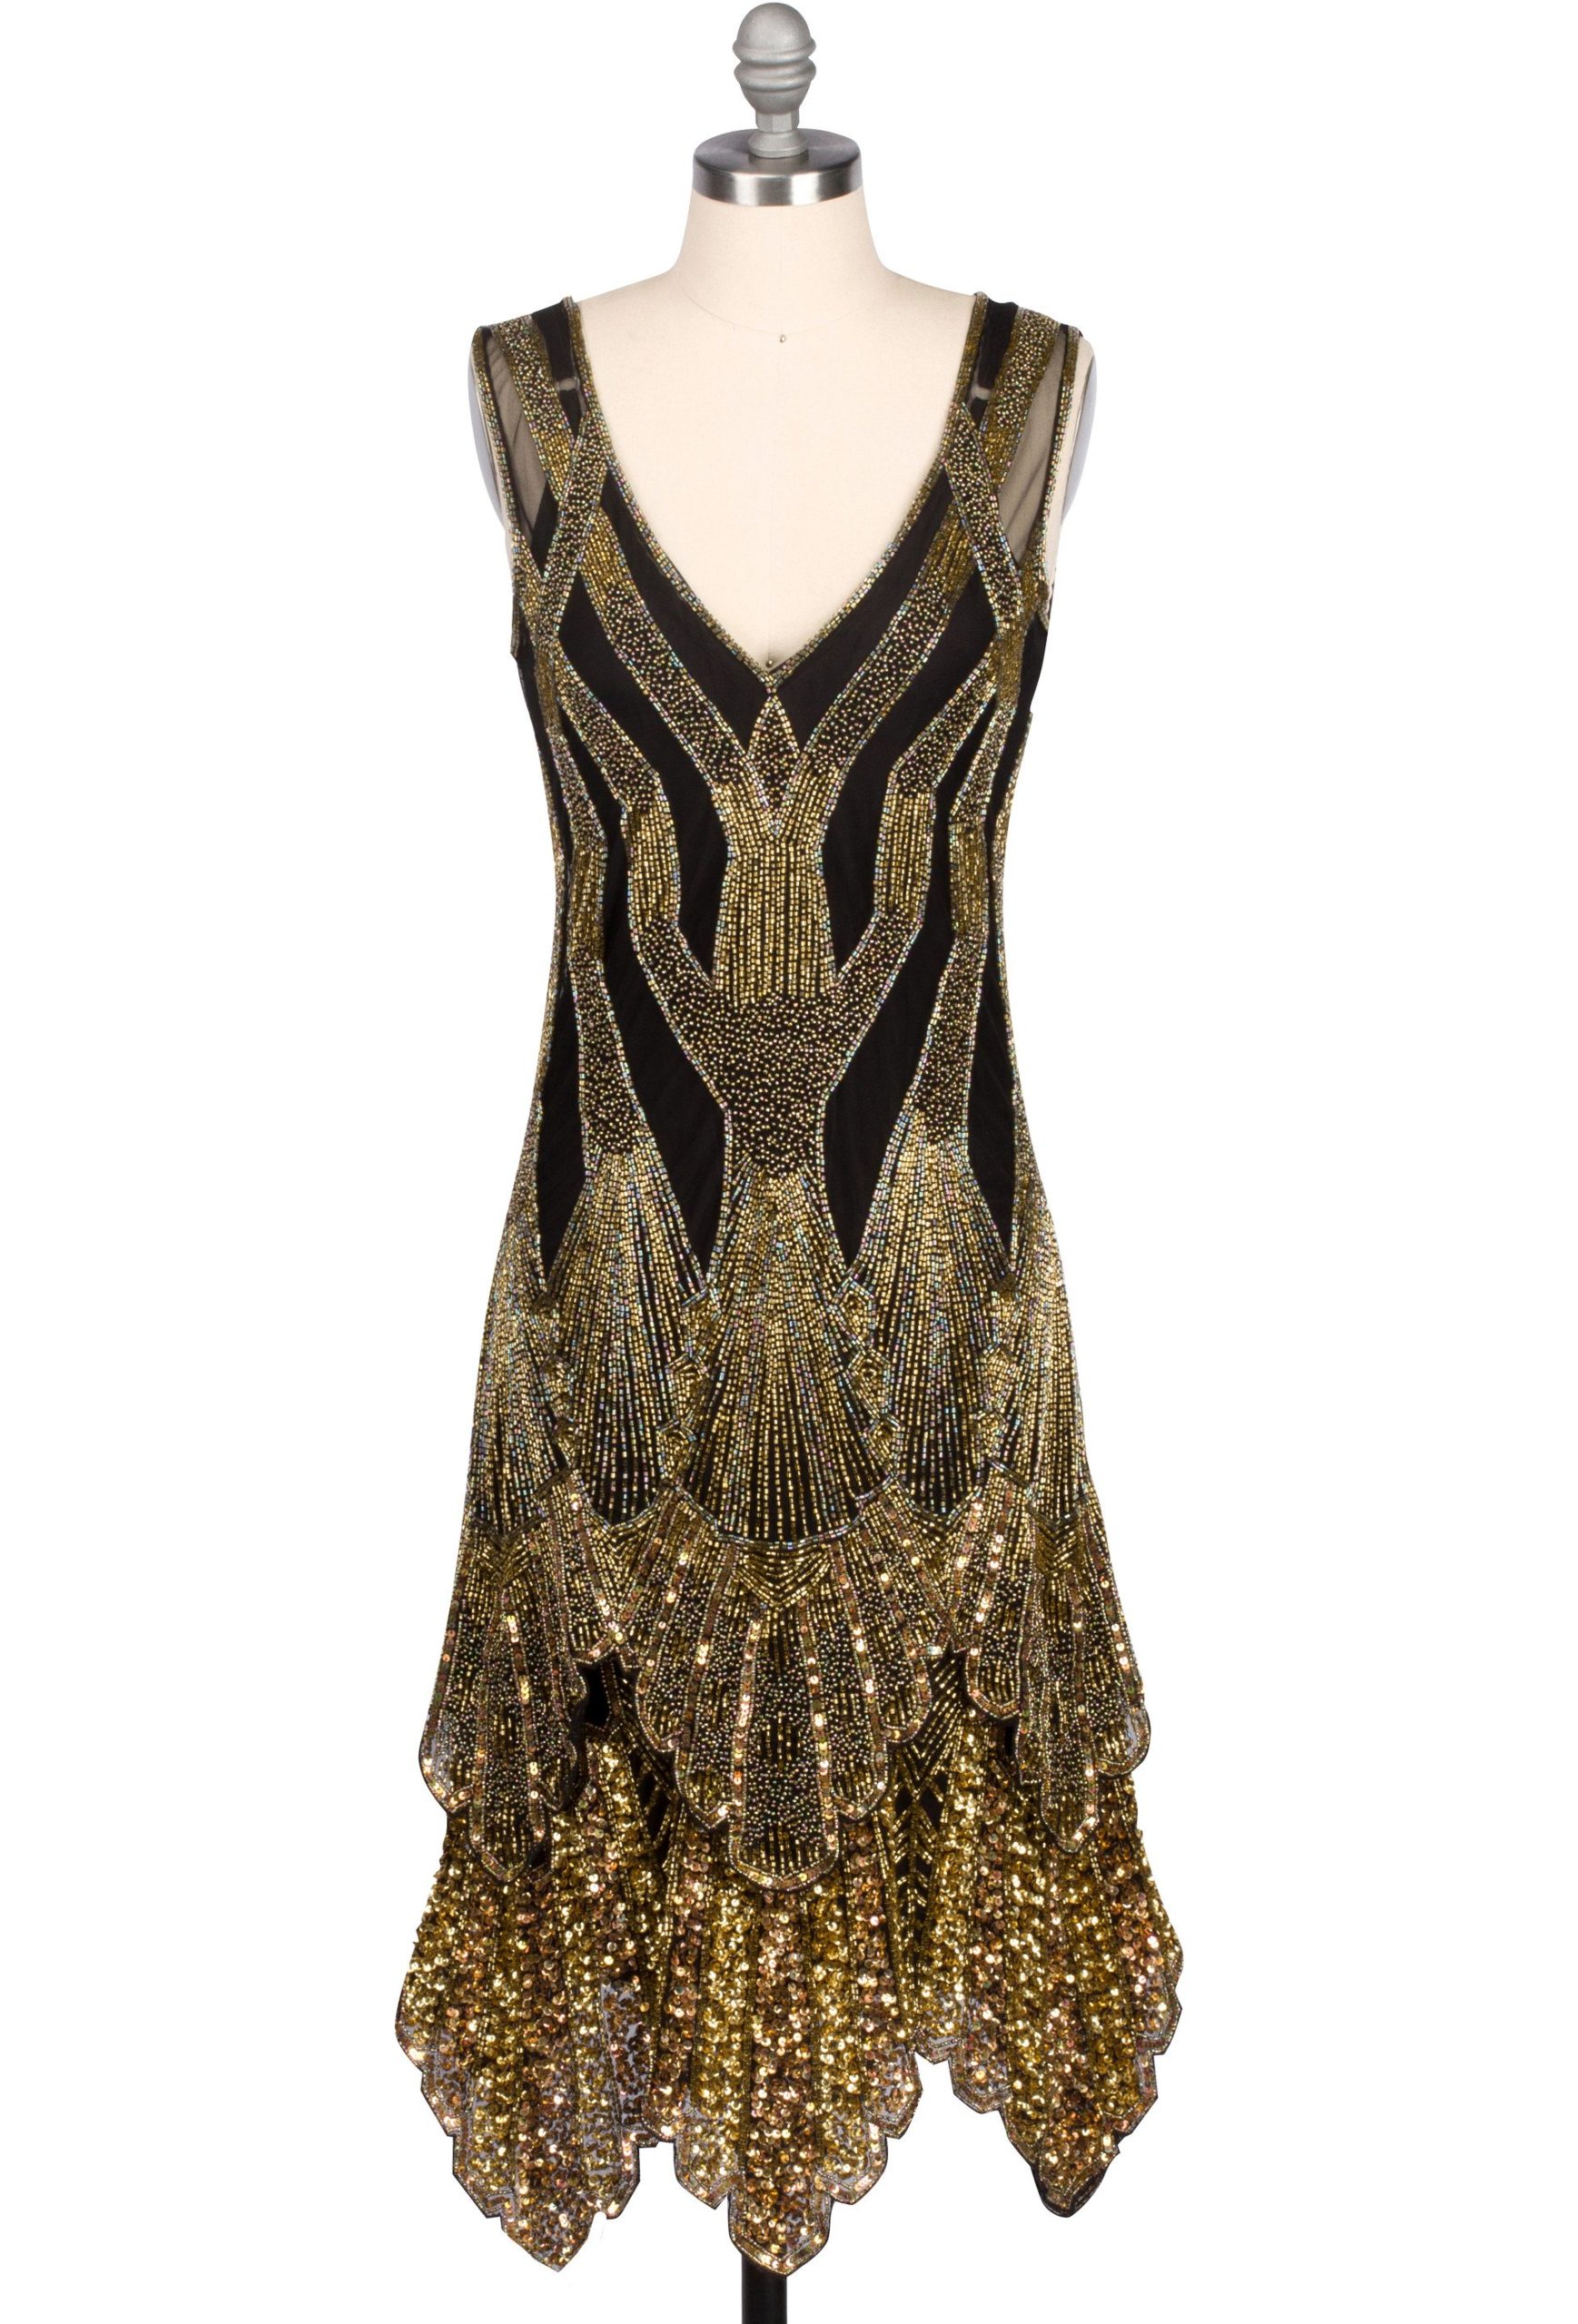 1920's HANDKERCHIEF SCALLOP PANEL ART DECO GOWN - GOLD ON BLACK - THE ...